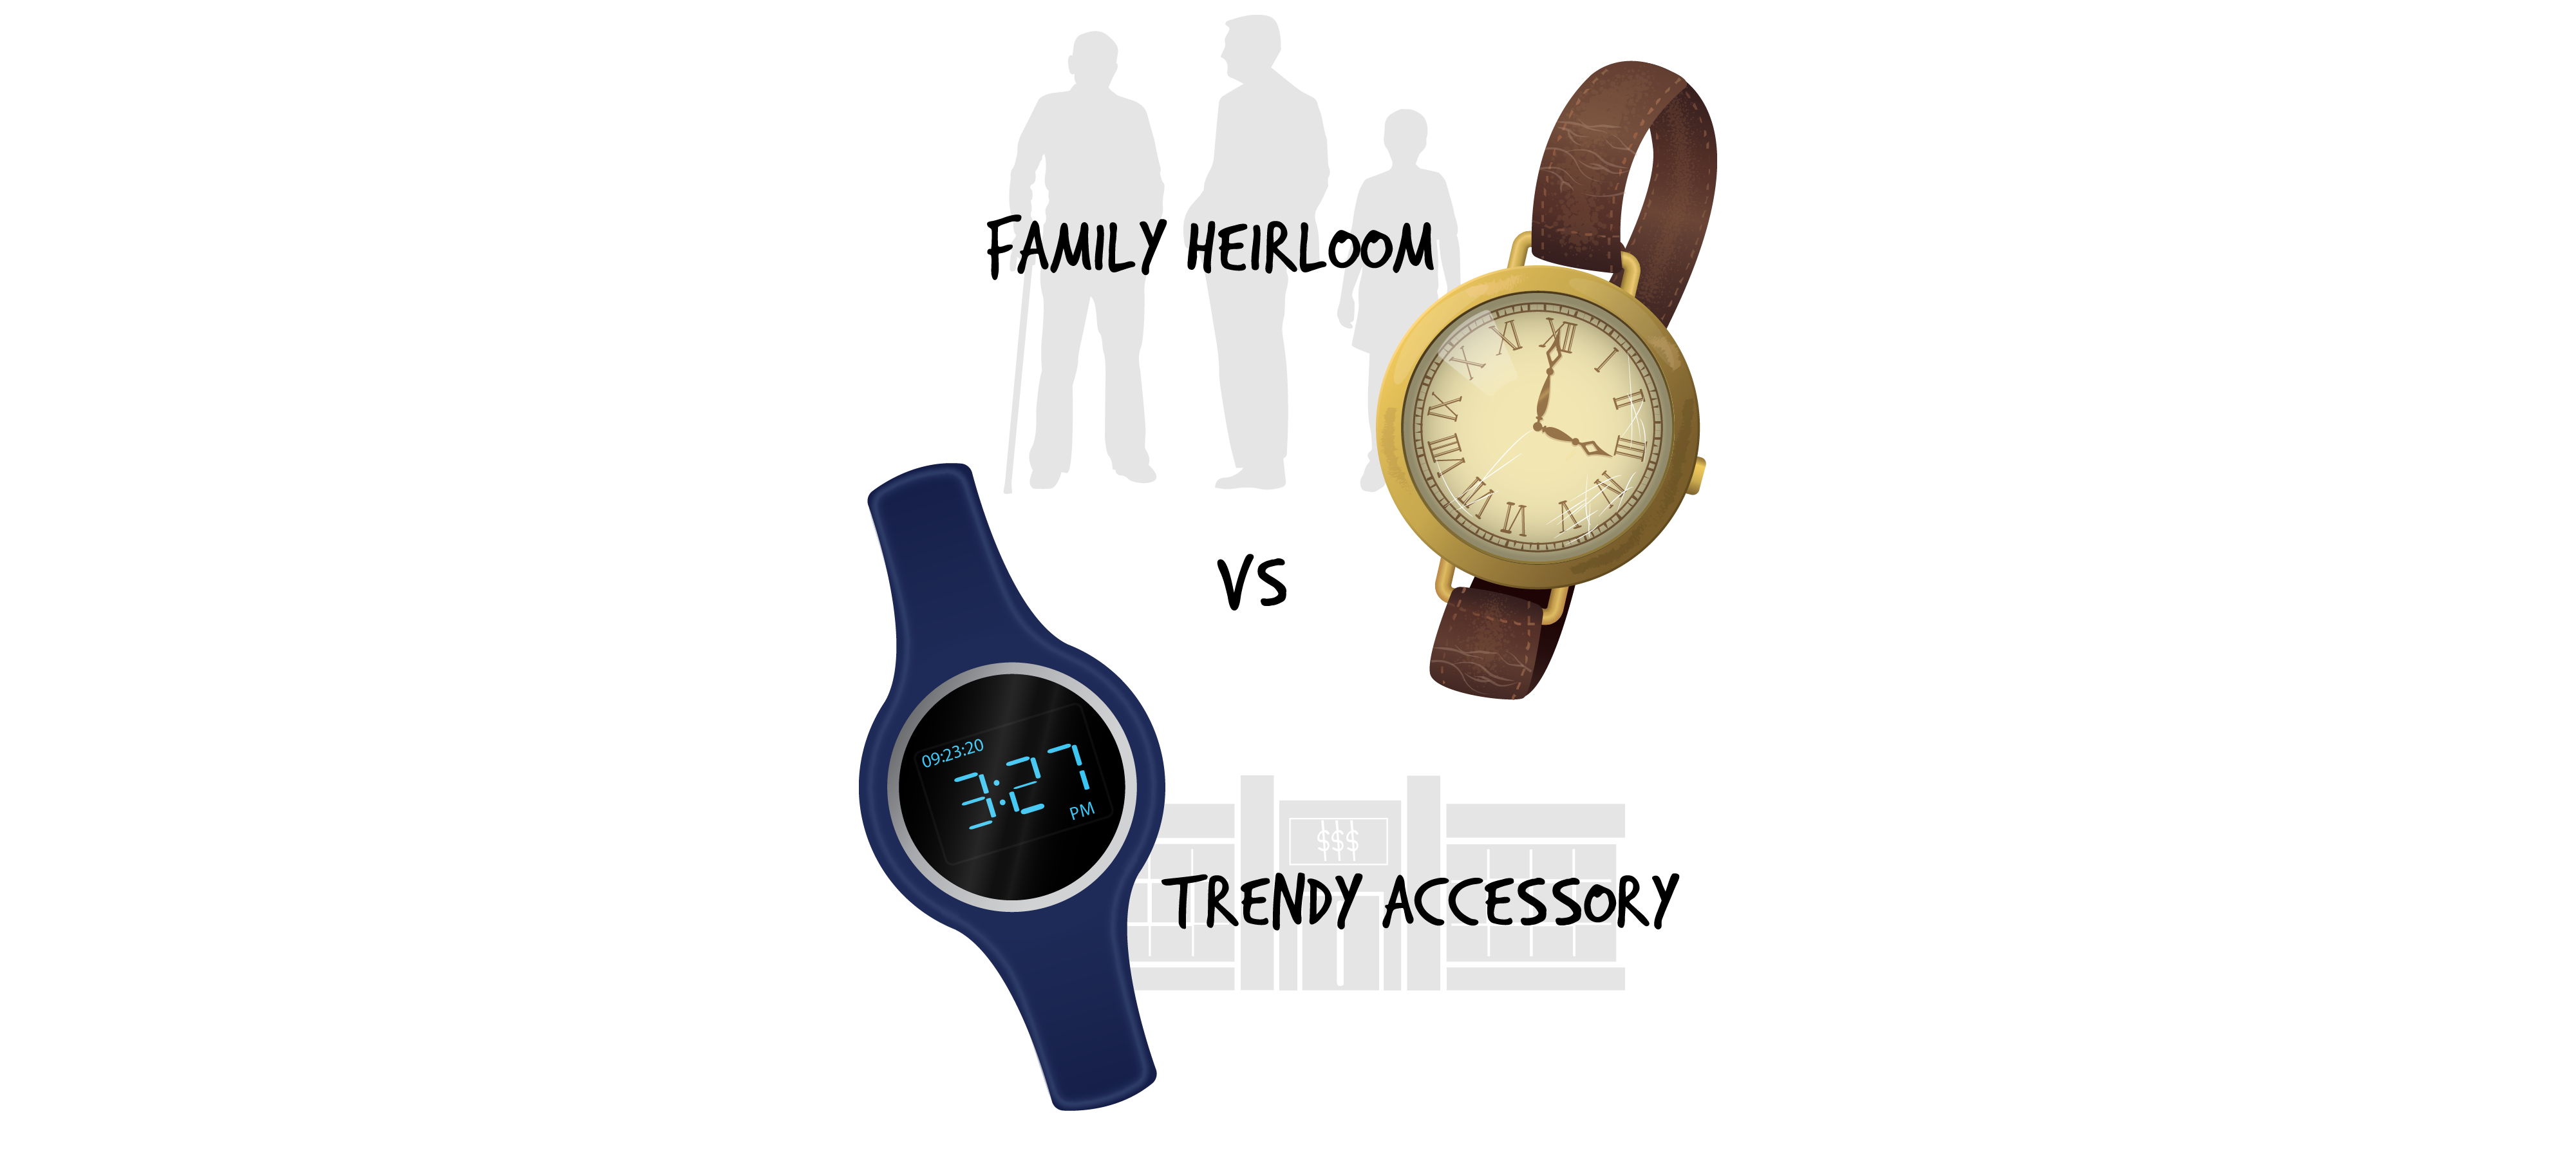 Two watches are shown over a background. The first is a brown leather analog watch with a white and gold face, placed in the top right corner. Next to it, in the top left corner, the text reads family heirloom. Silhouettes of 3 figures (an older person with a cane, a middle-aged person, and a younger person) are placed behind the text. In the bottom left corner is the second watch. This one is digital and is made of blue plastic, with a black and silver face. The text on the bottom right corner reads trendy accessory over the silhouette of a modern building in the background.